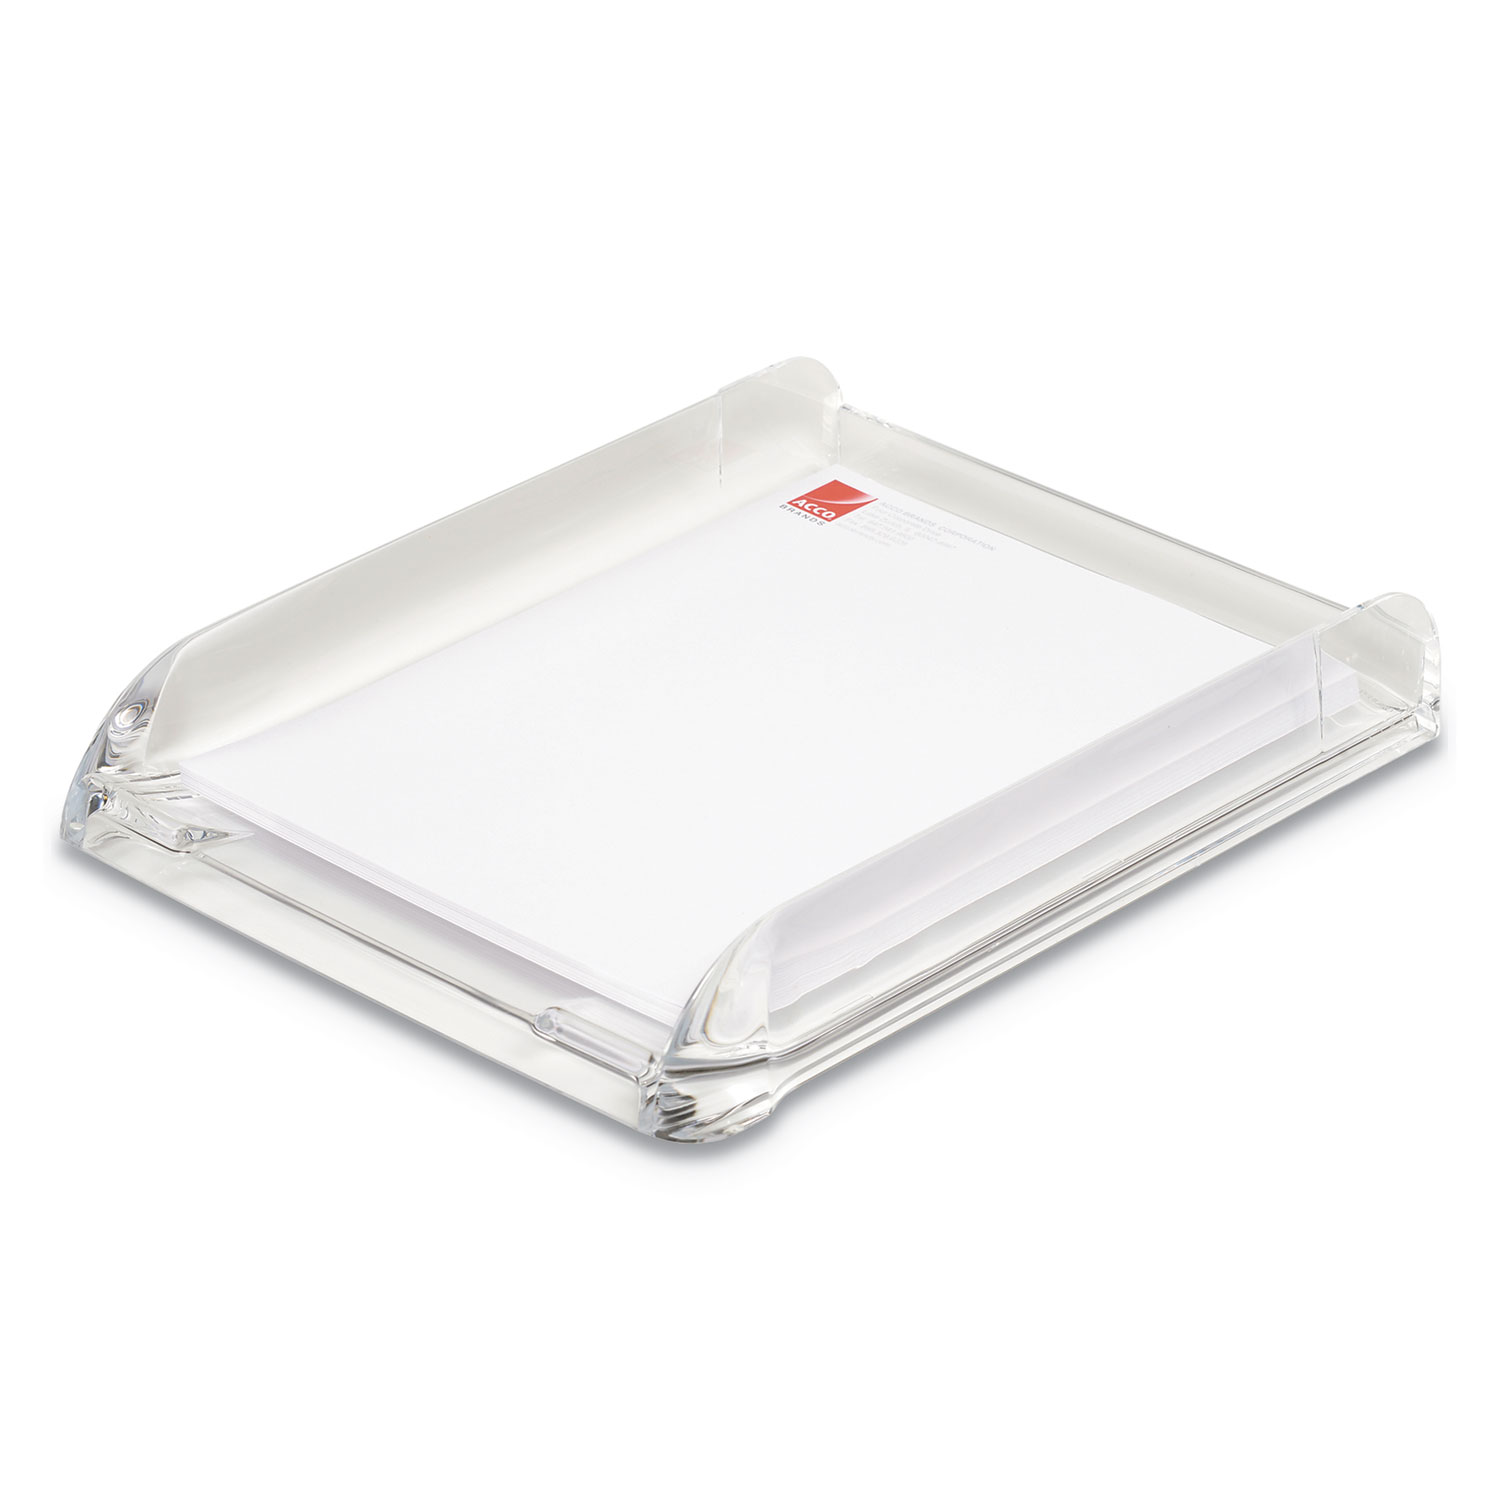  Swingline S7010132 Stratus Acrylic Document Tray, 1 Section, Letter Size Files, 10.75 x 2.5 x 13.25, Clear (SWI10132) 